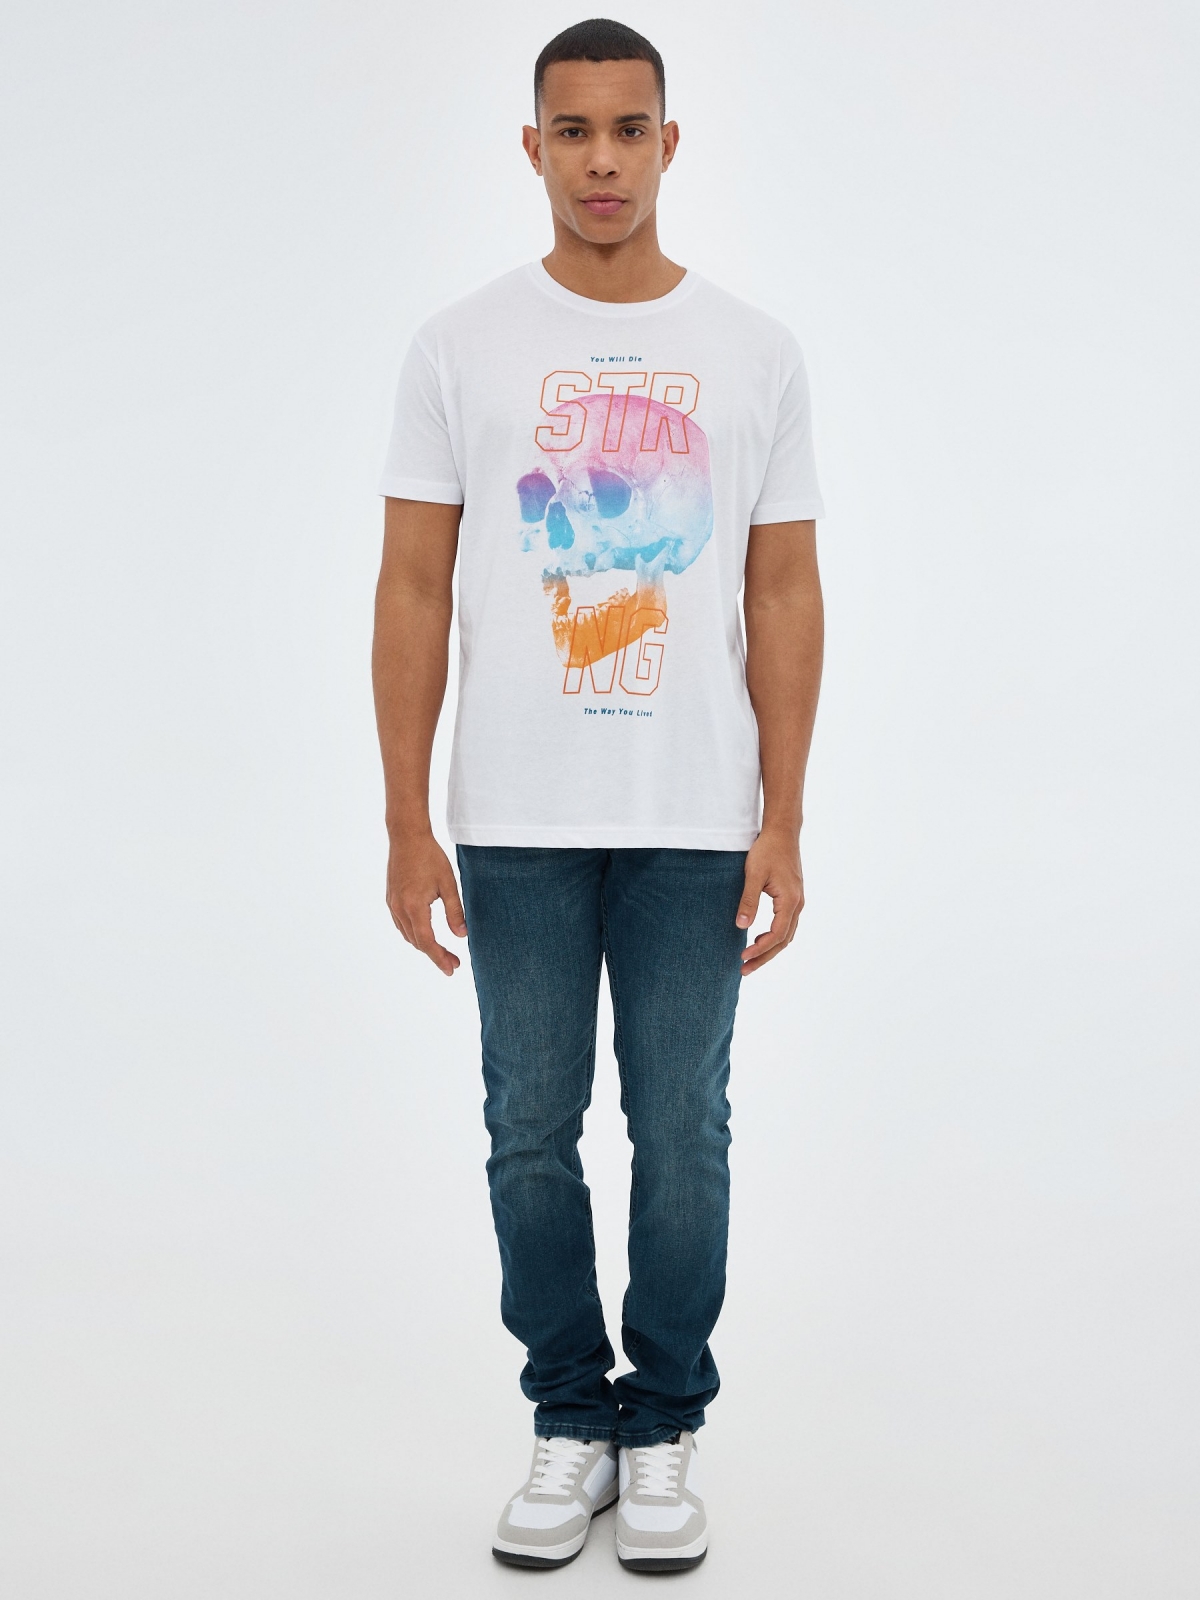 Multicolor skull t-shirt white front view